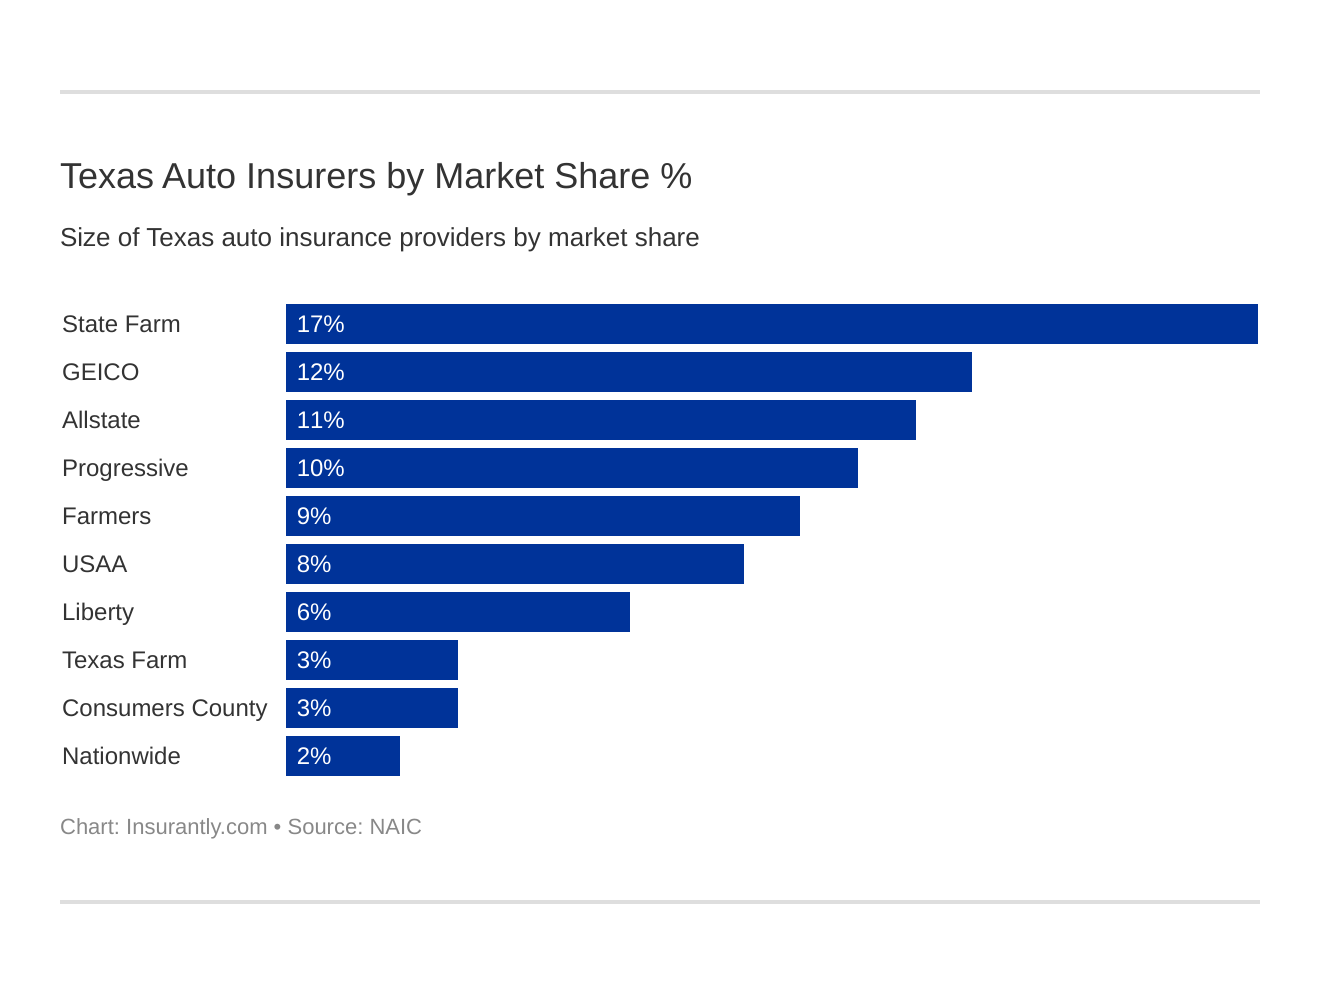 Texas Auto Insurers by Market Share %